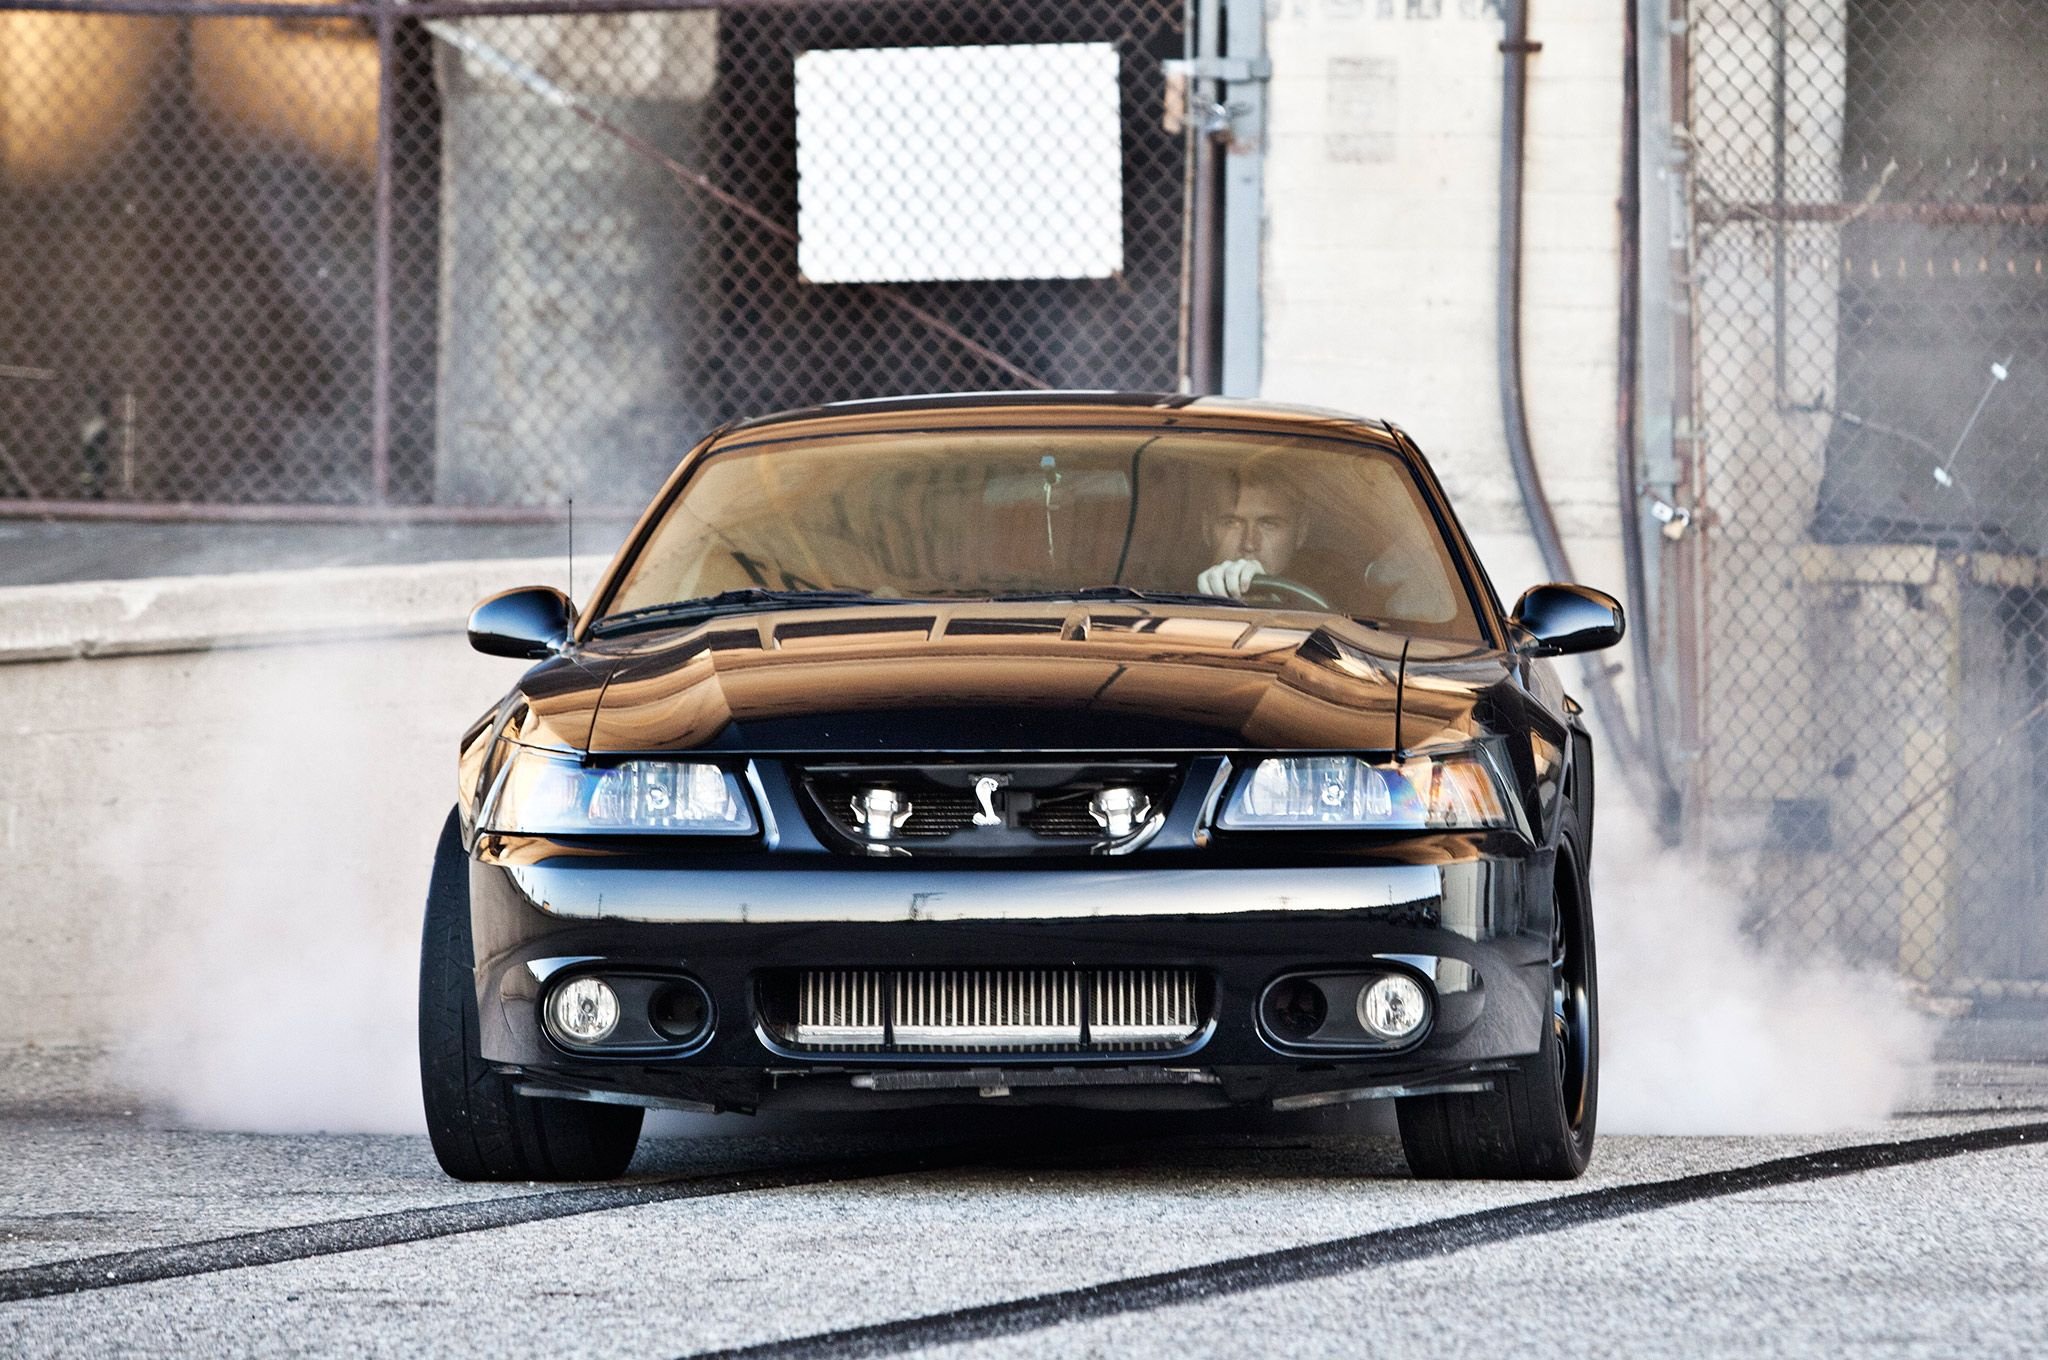 2003 Ford Mustang Cobra Terminator Muscle Pro Touring Supercar Super Street Burnout Usa 04 Wallpapers Hd Desktop And Mobile Backgrounds